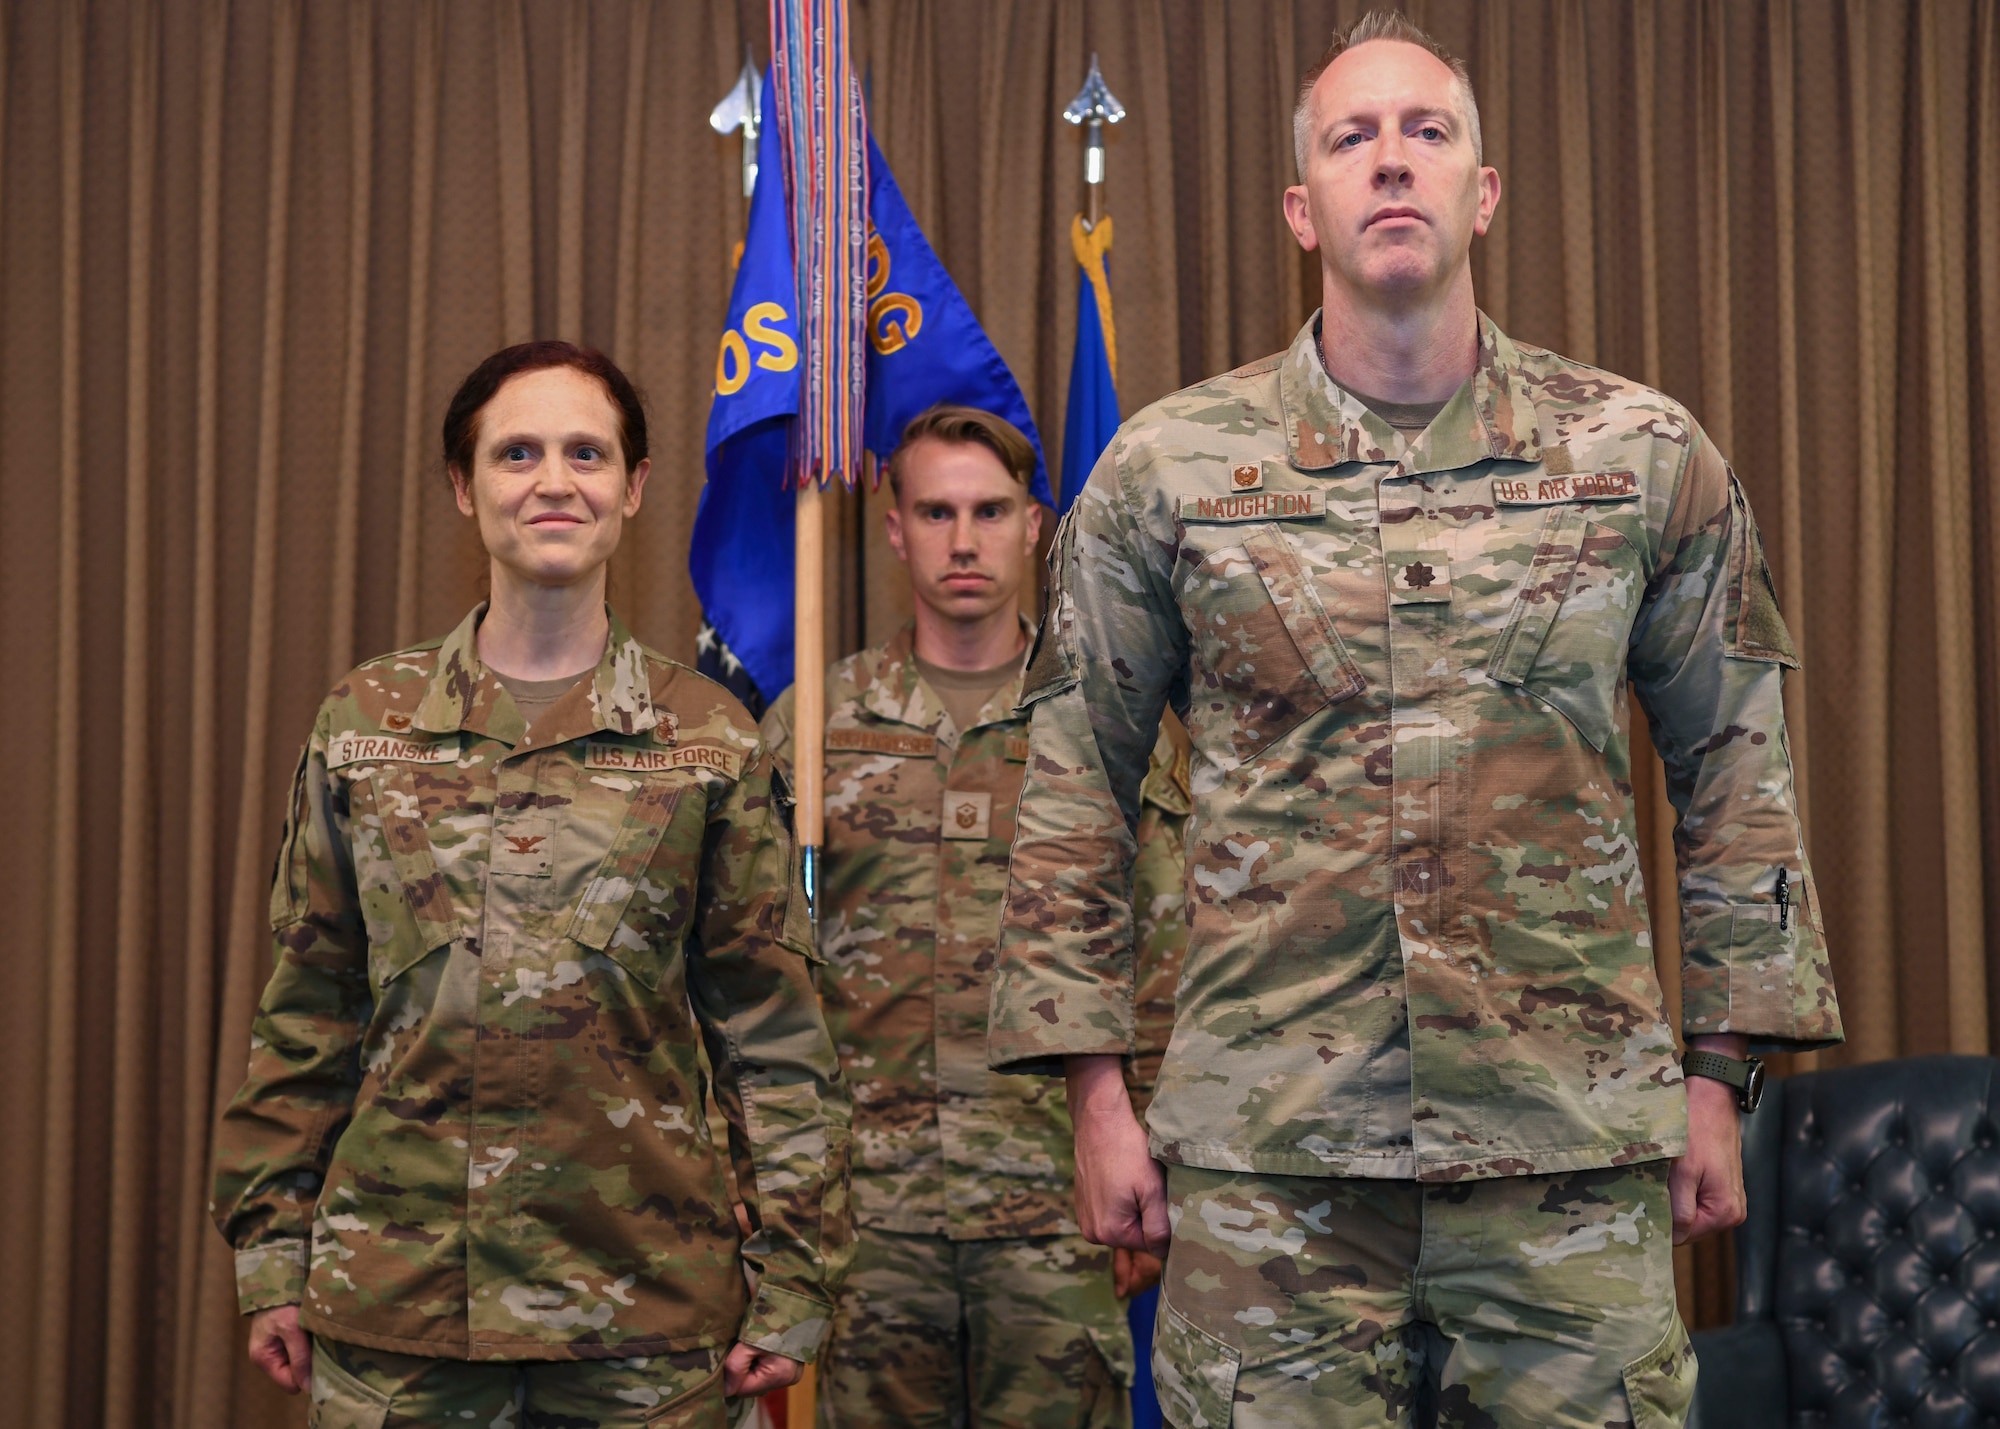 Three people in green uniforms stand for a photo.